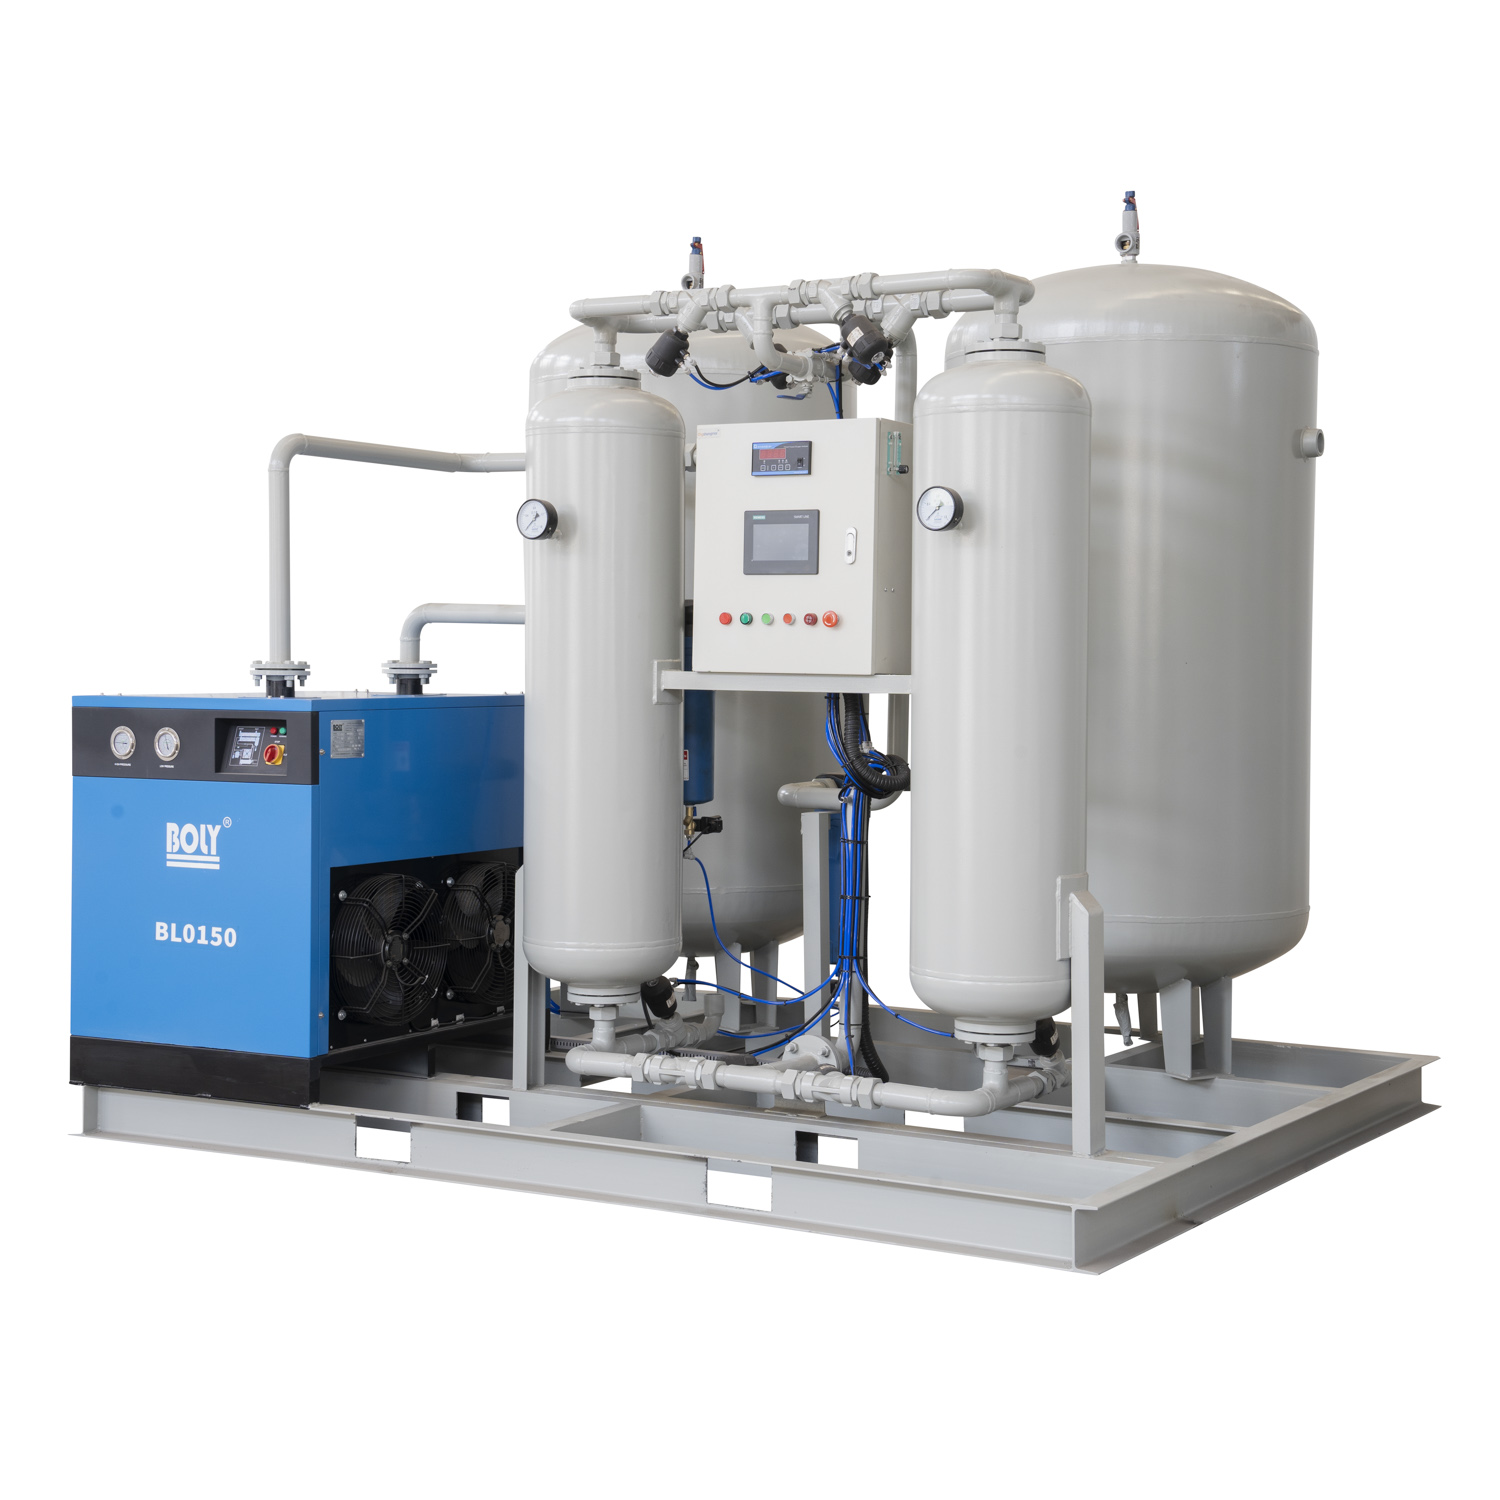 Factory direct sales of small nitrogen generators for food industry 